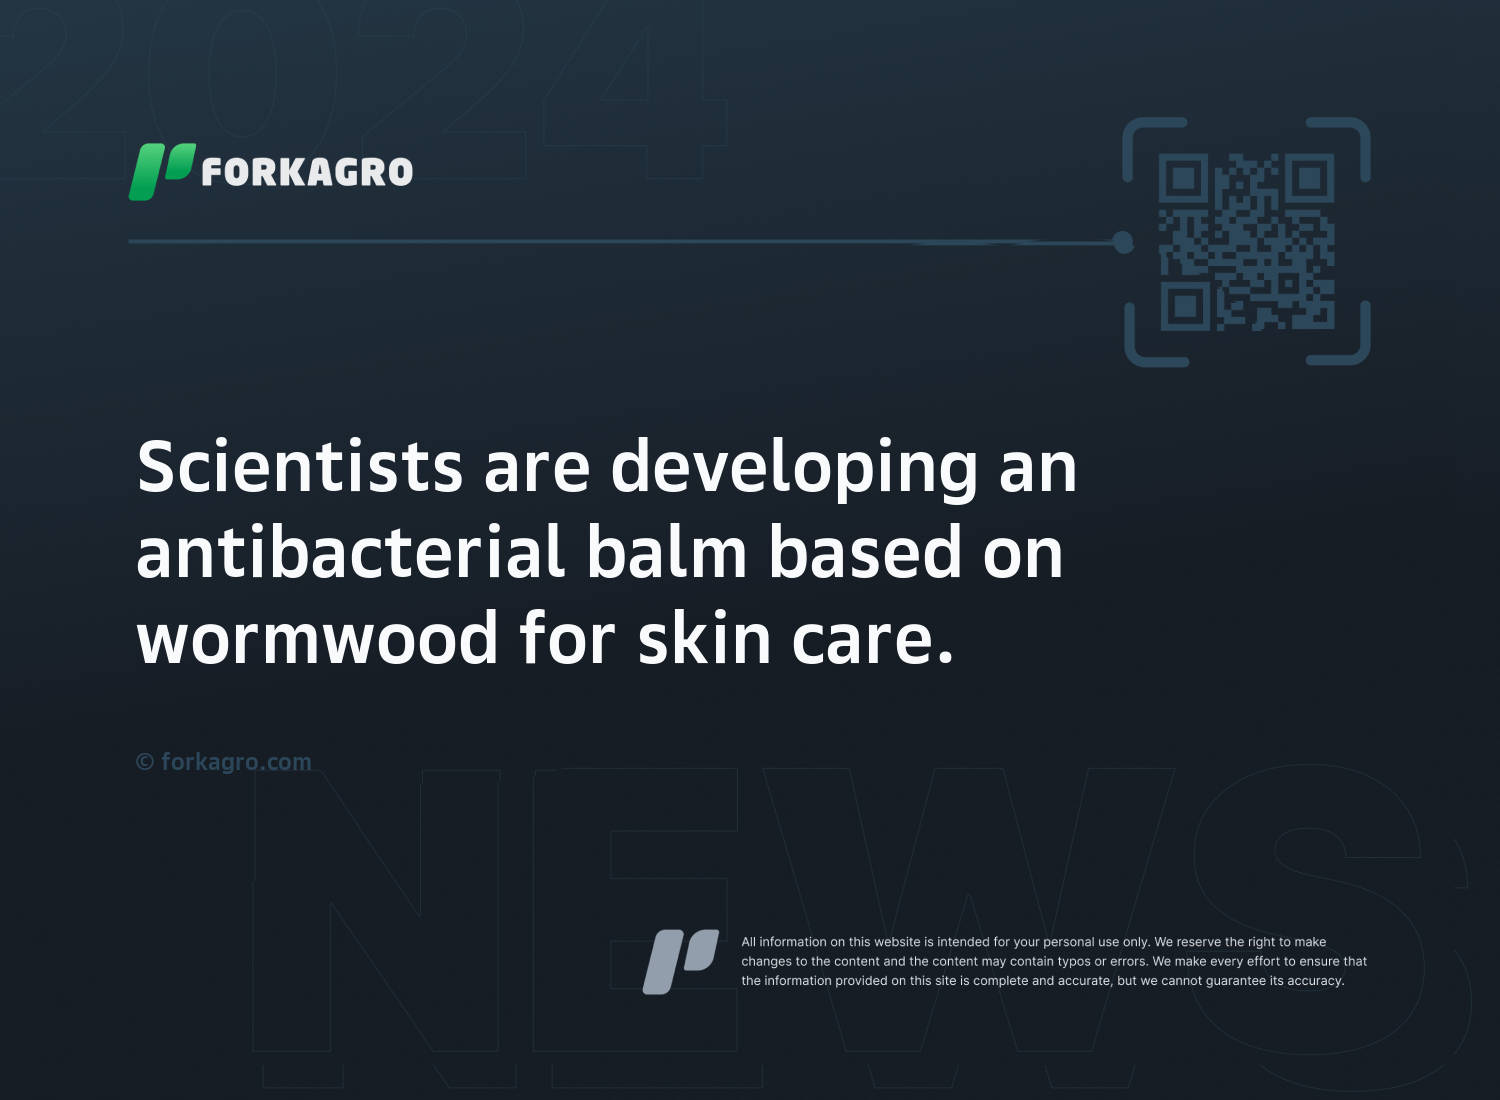 Scientists are developing an antibacterial balm based on wormwood for skin care.